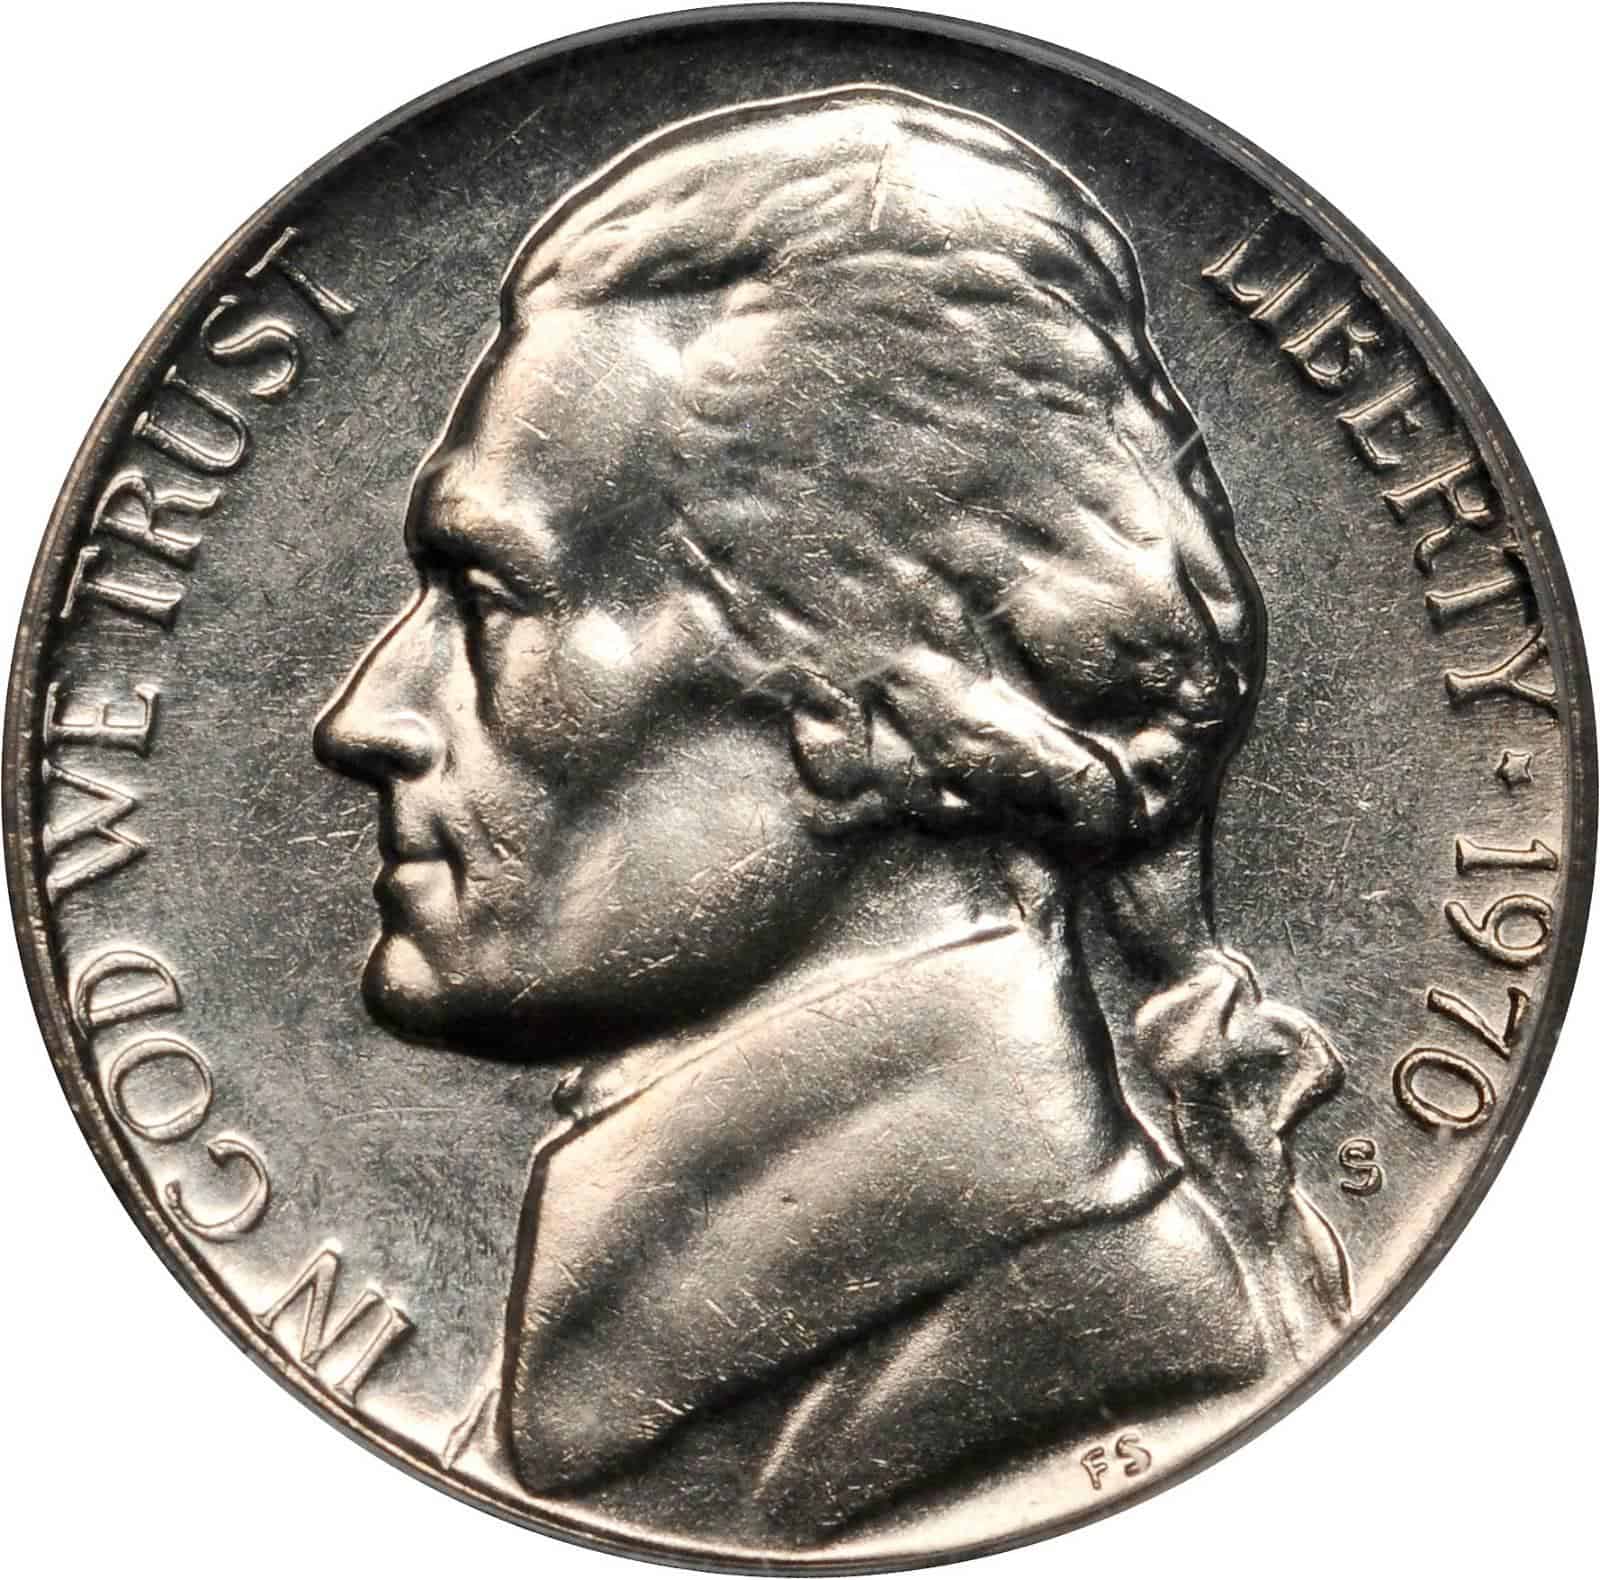 The obverse of the 1970 Jefferson nickel